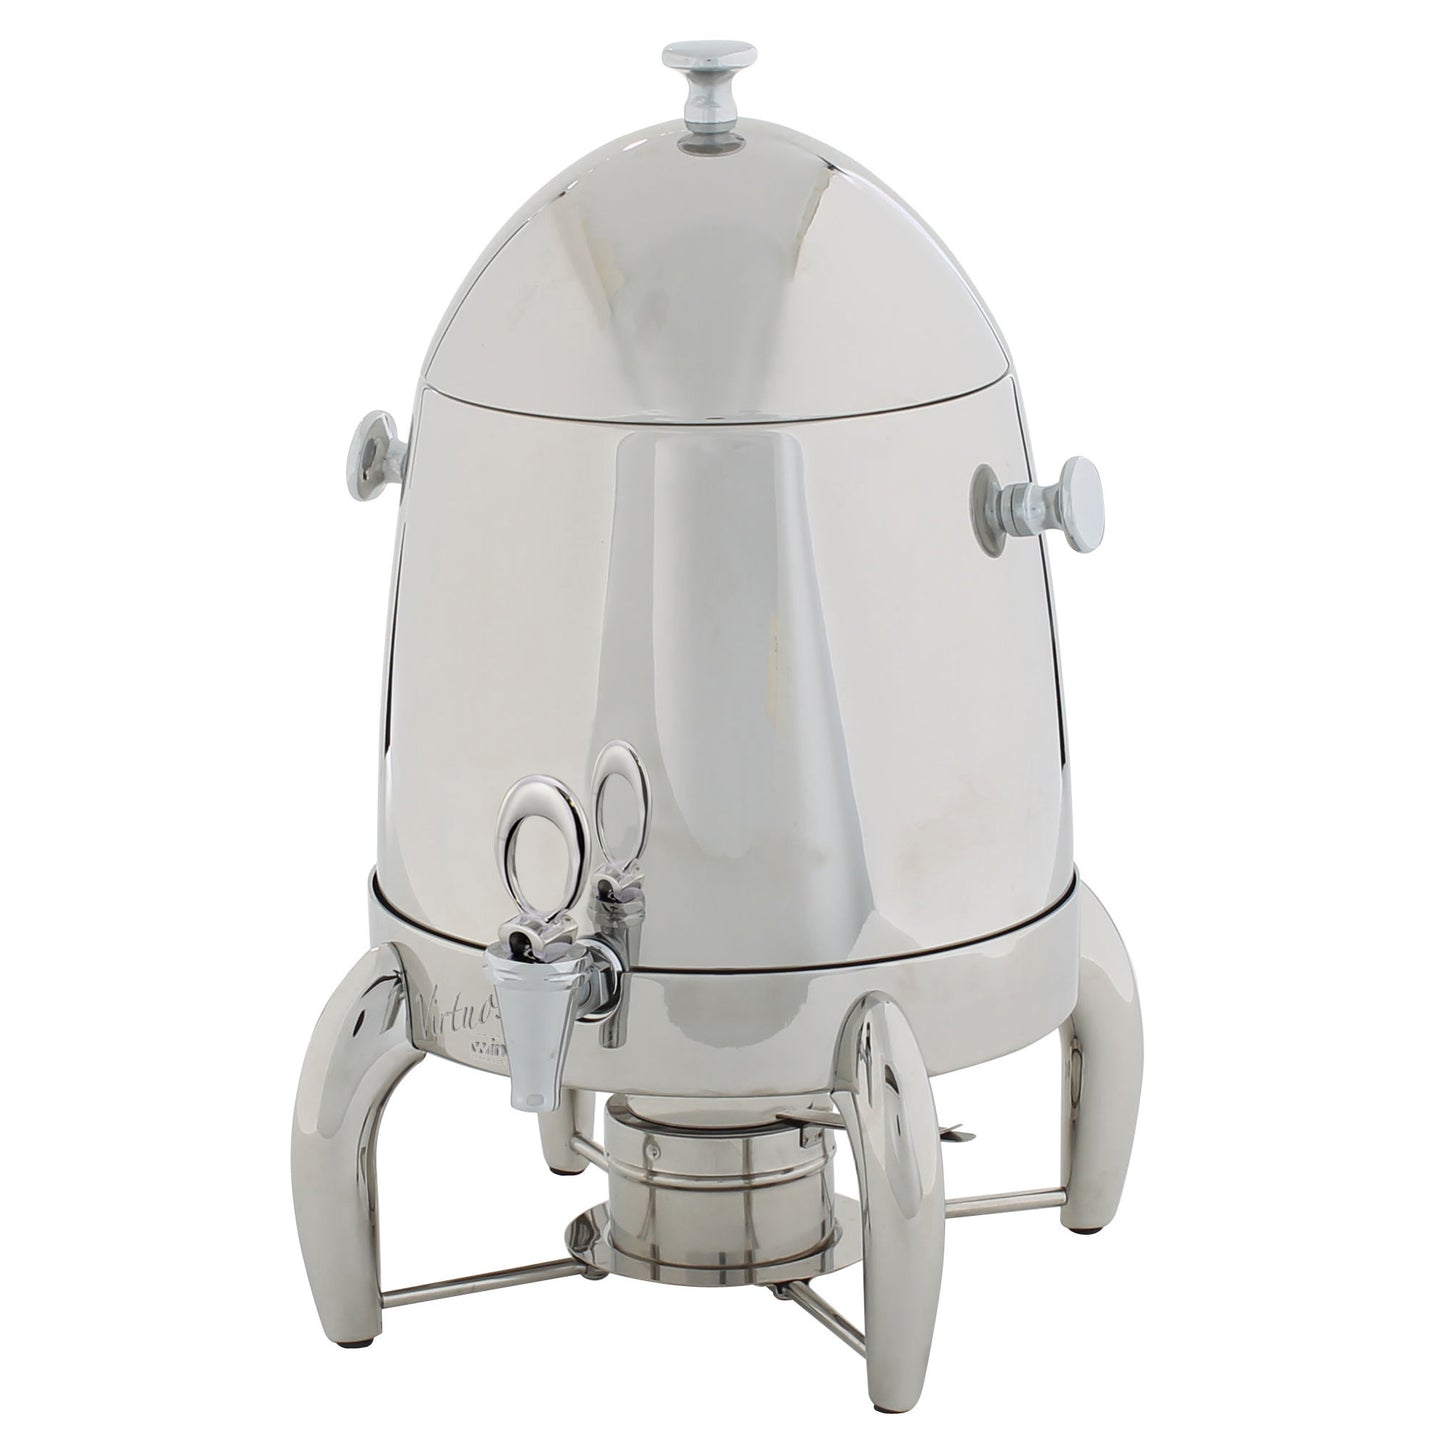 903B - Virtuoso Collection Coffee Urn - 3 Gallons